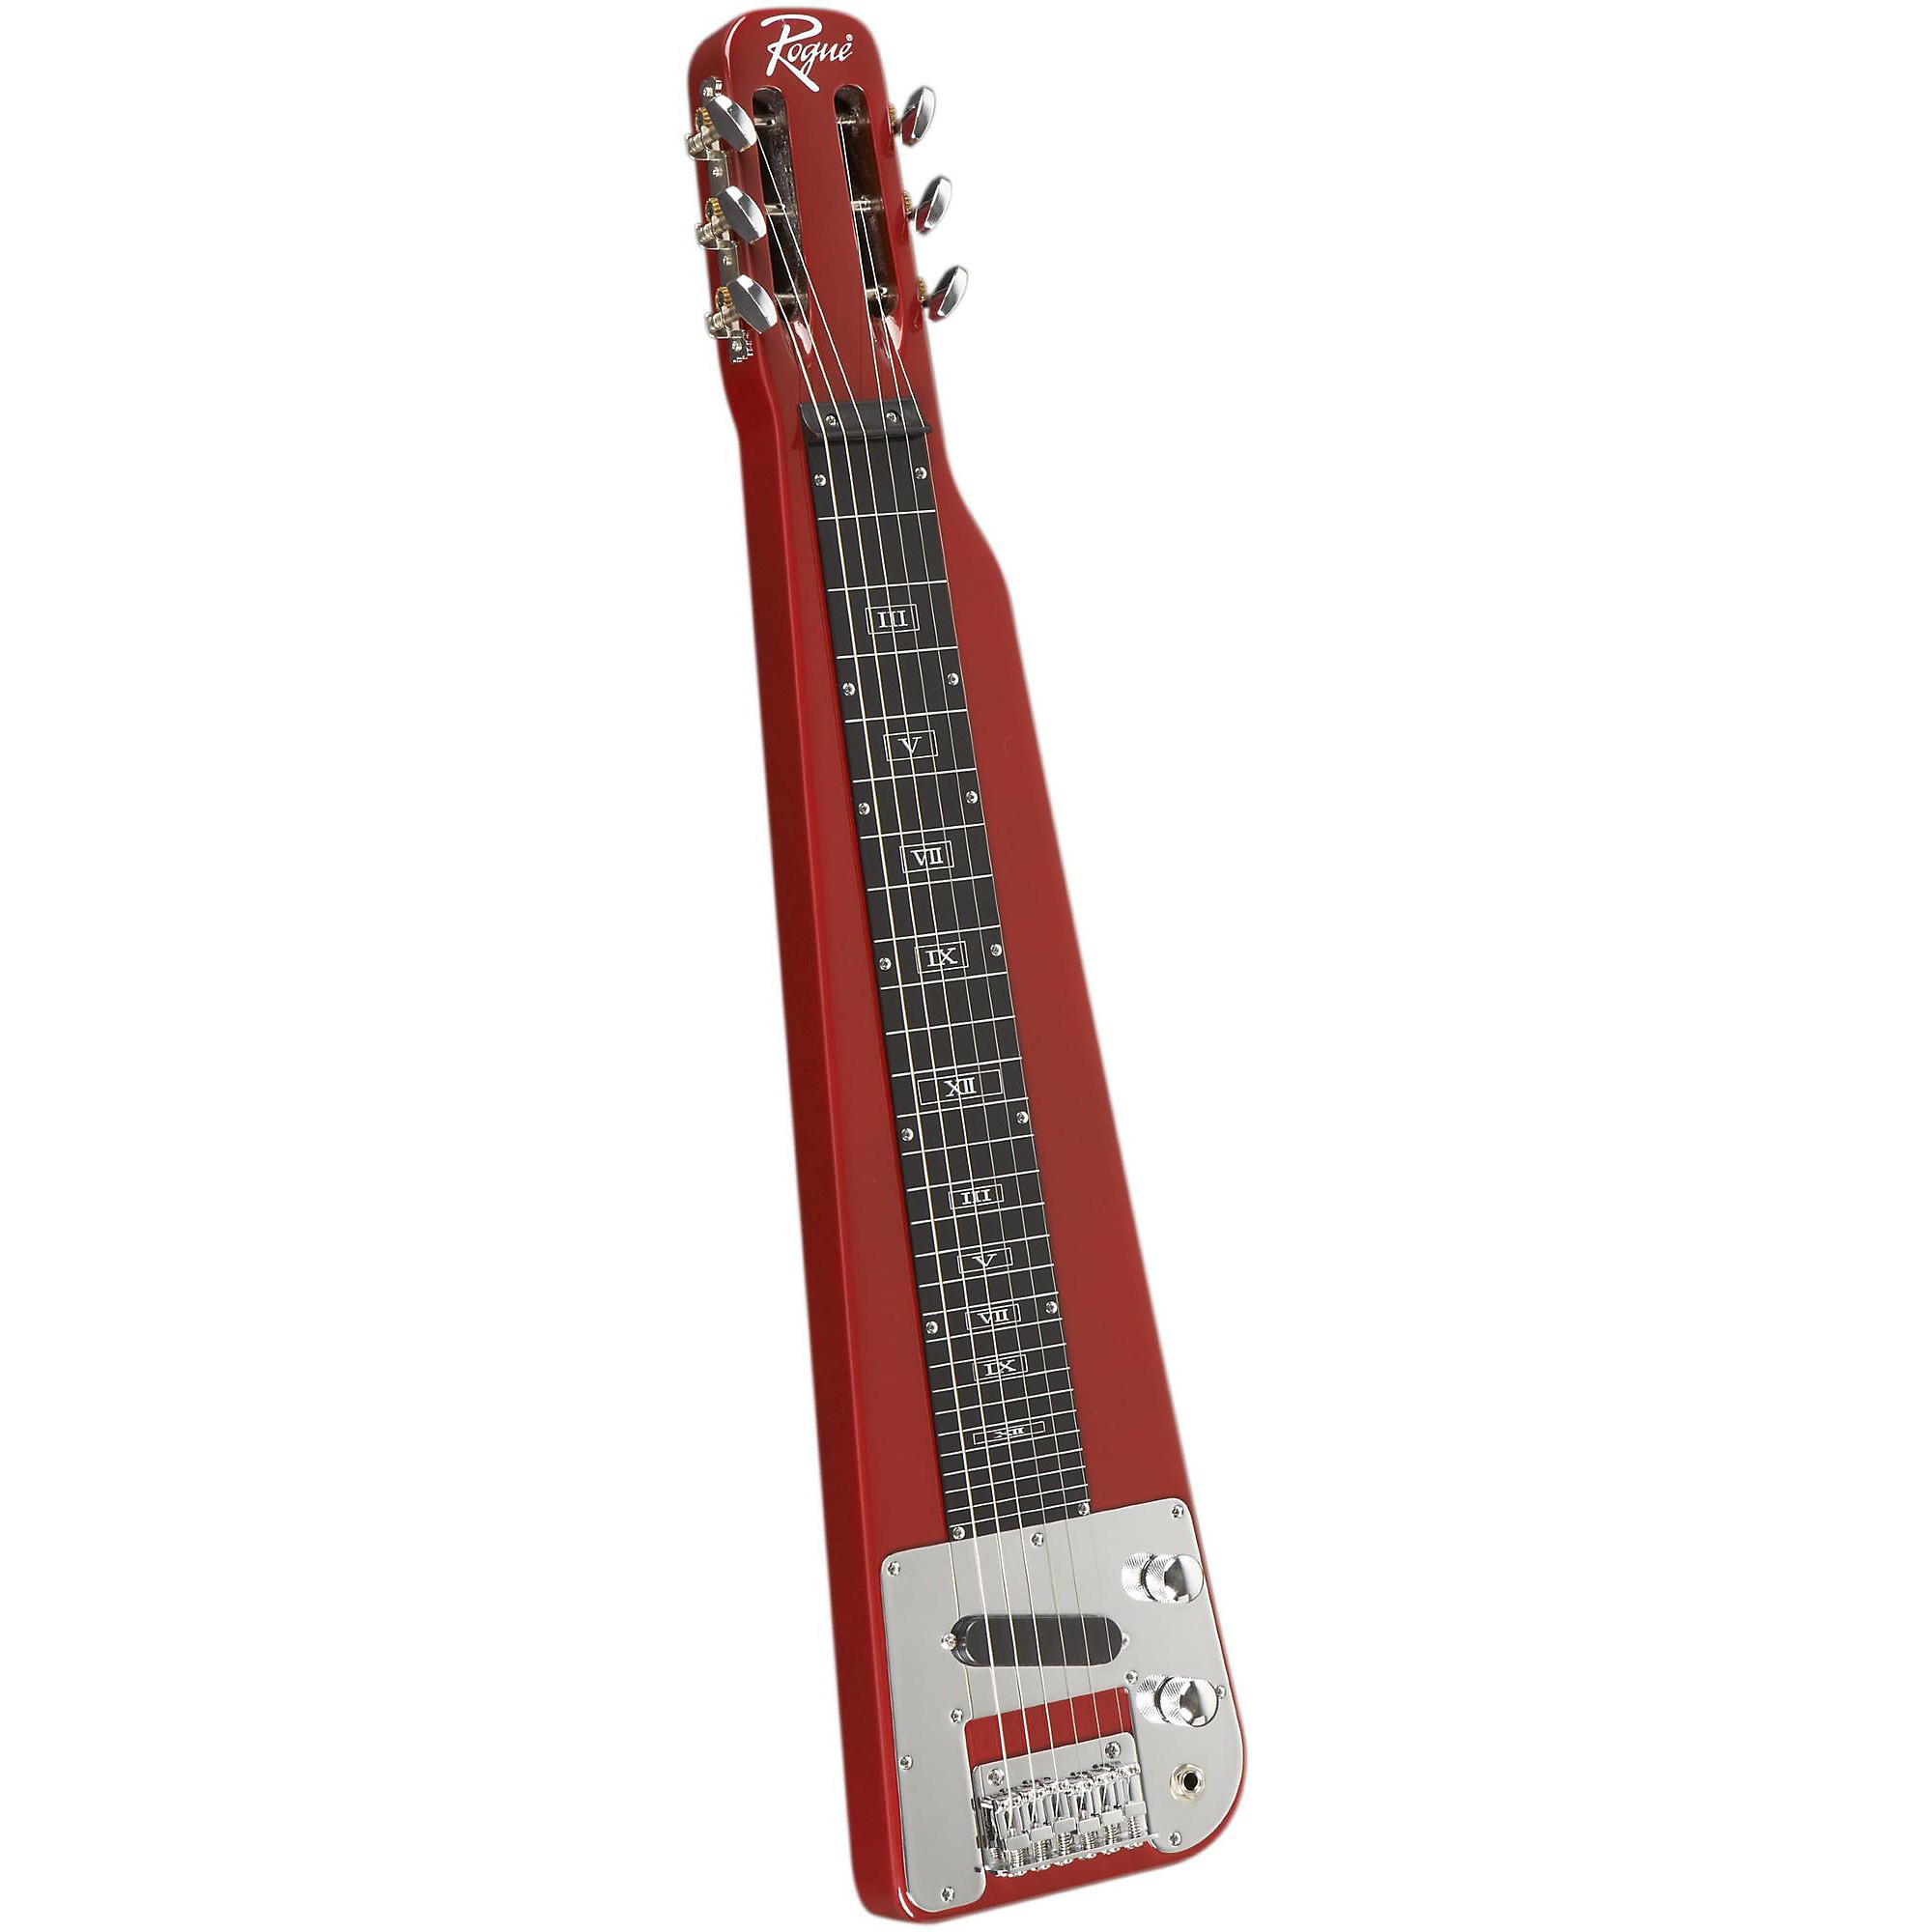 Asher Electro Hawaiian Universal Lap Steel Stand  Adjustable Height -  Asher Guitars & Lap Steels Store